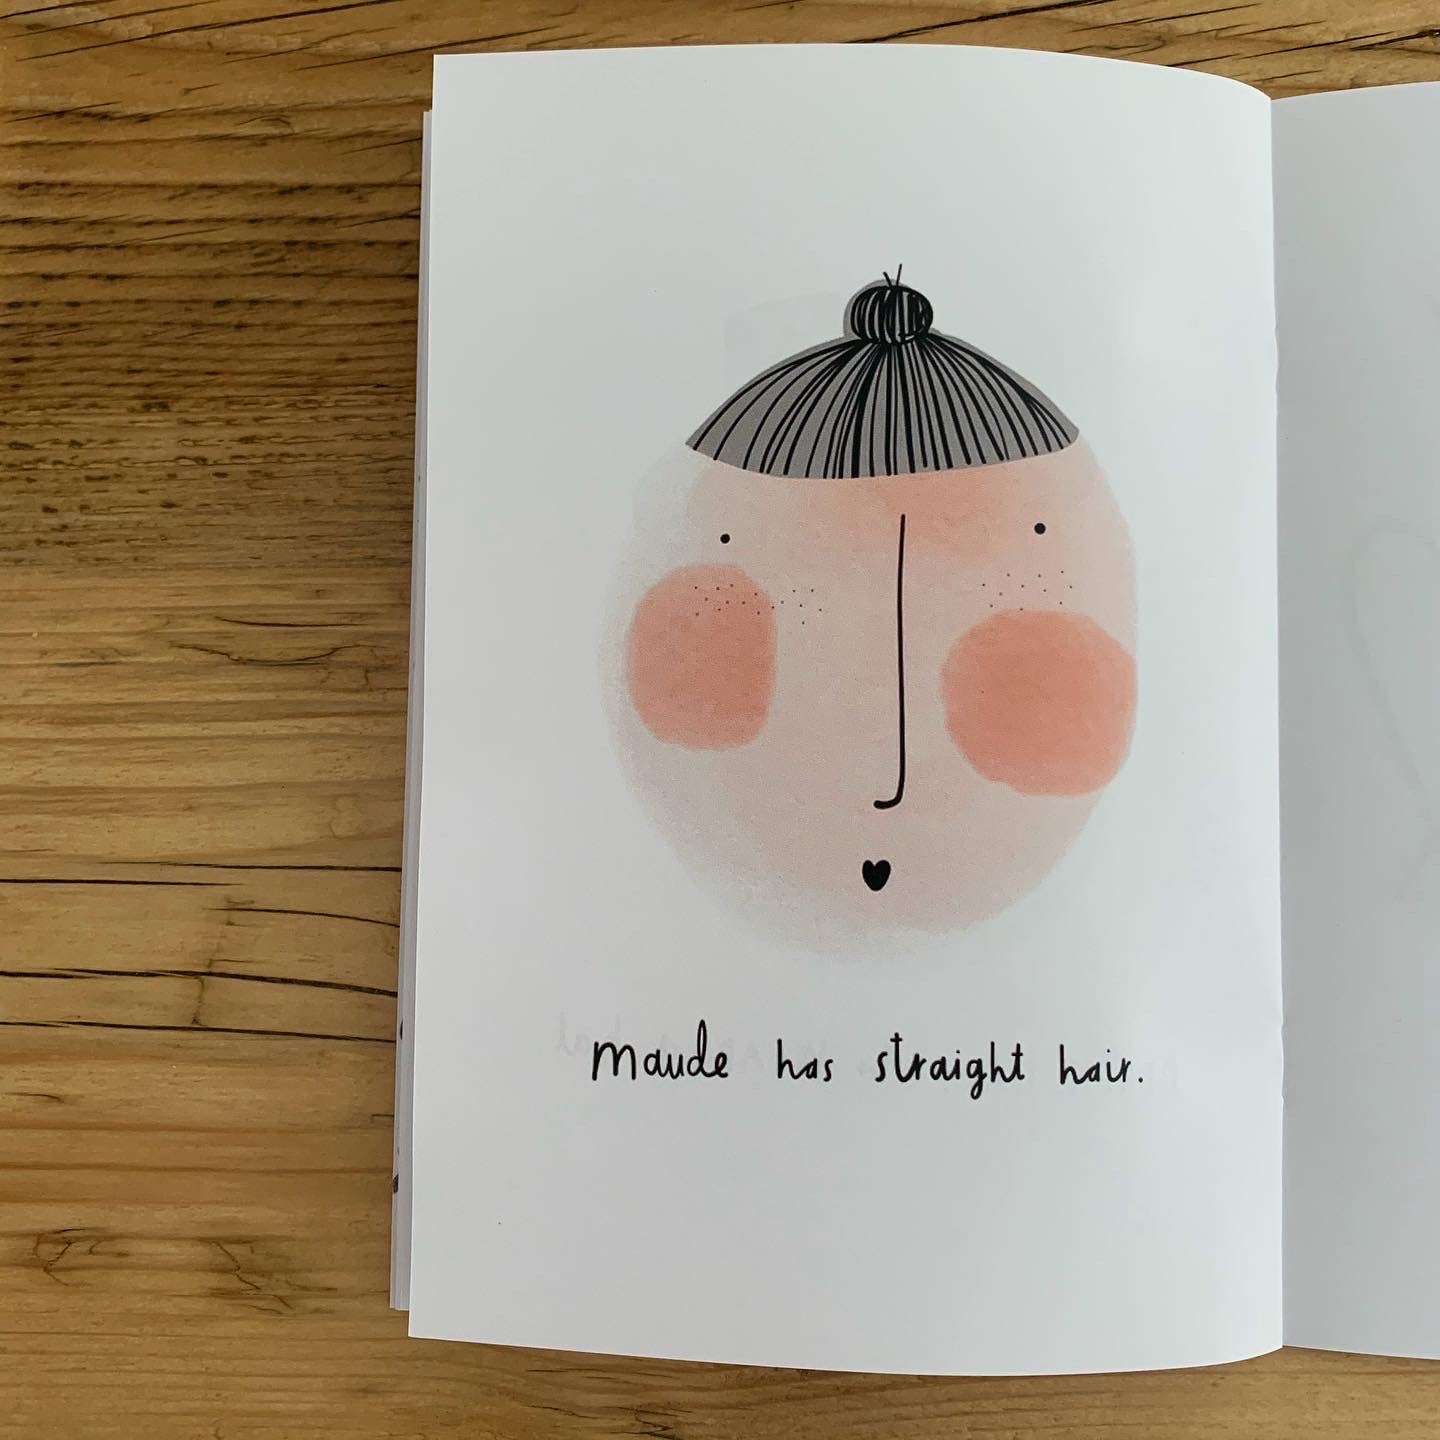 Everyone is Different - A little book with a BIG message - Illustrated and published by Rachel Gale